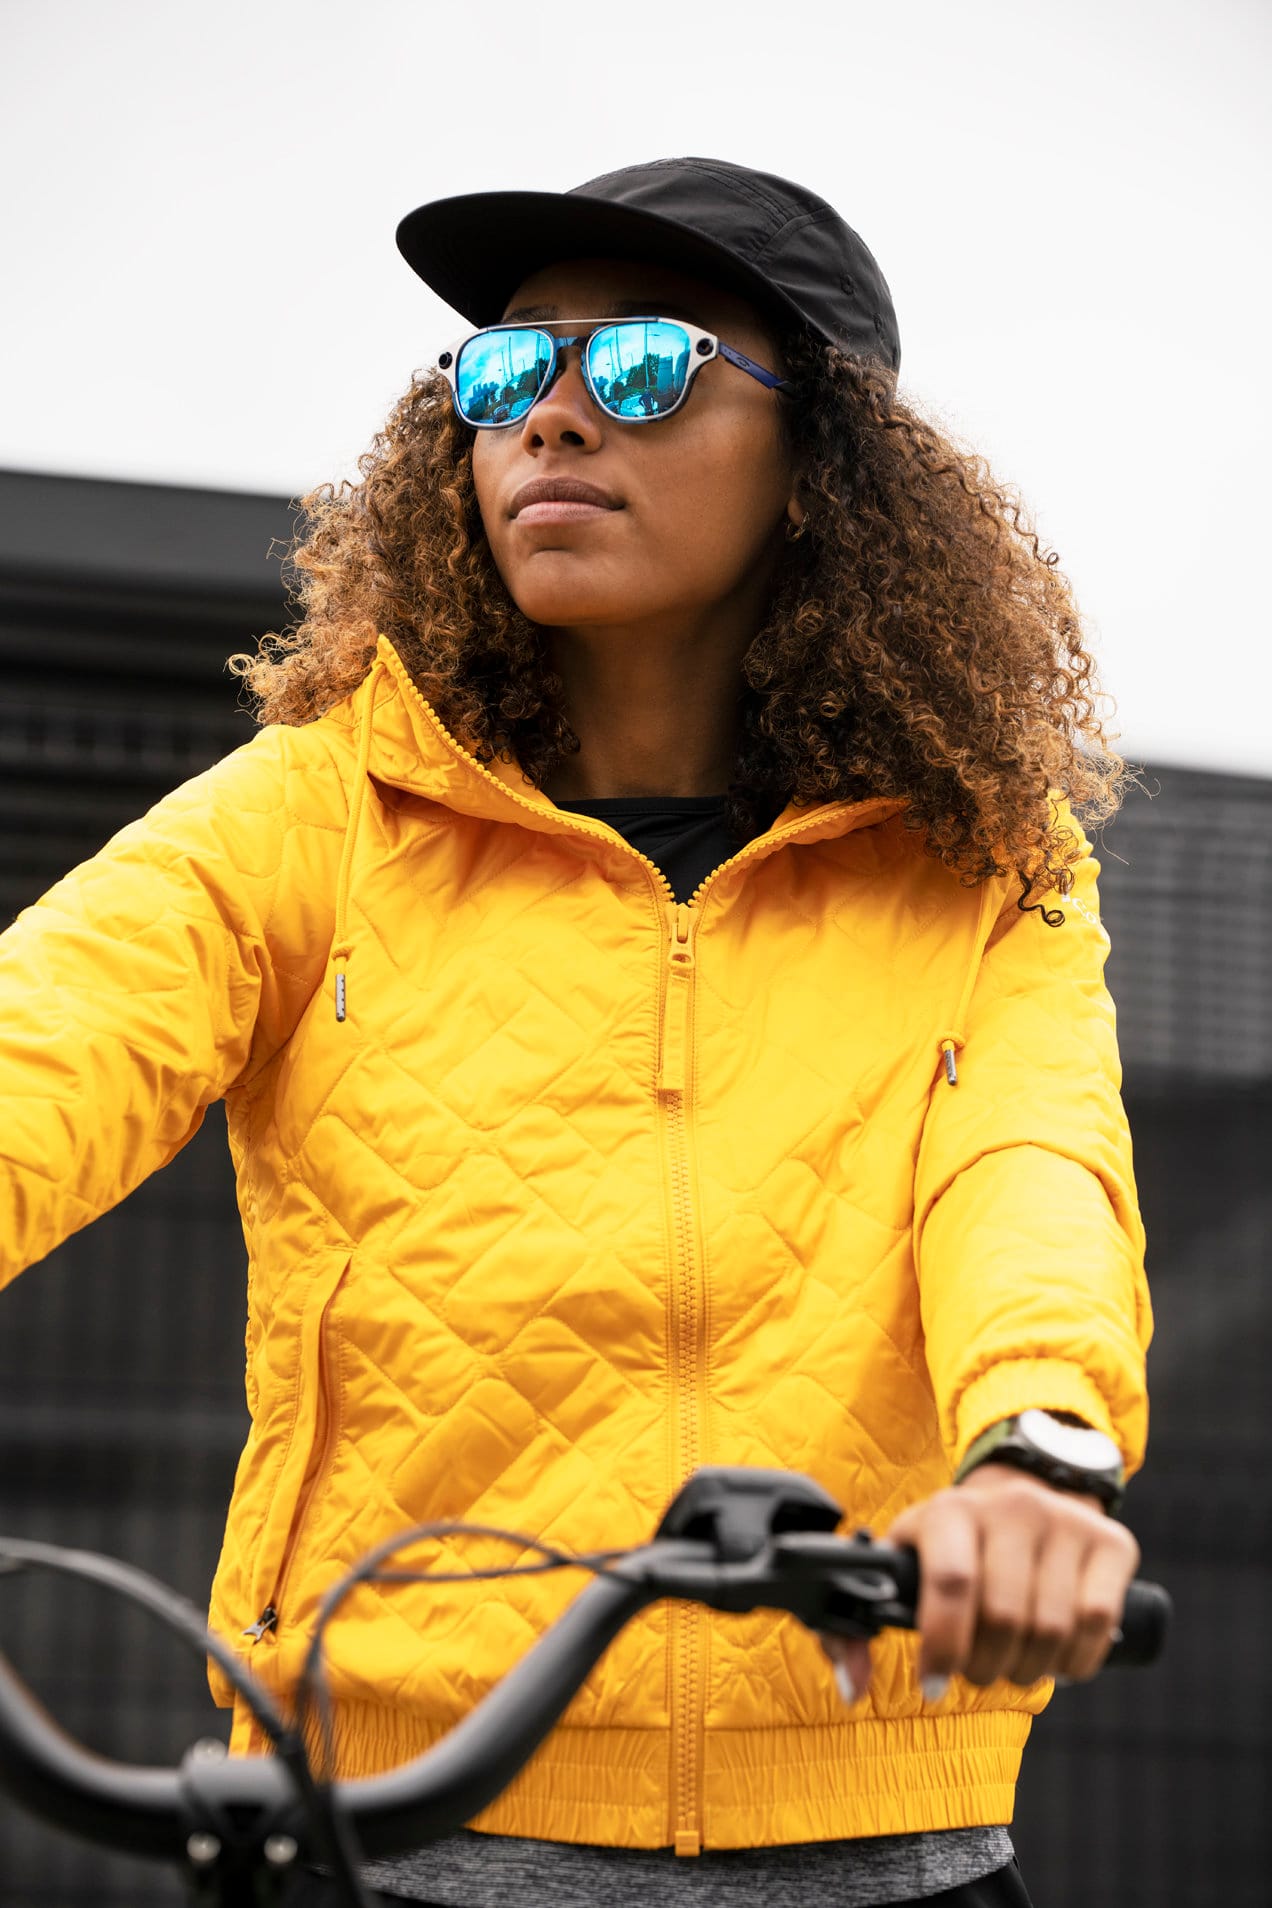 Essential clothes for commuting by ebike